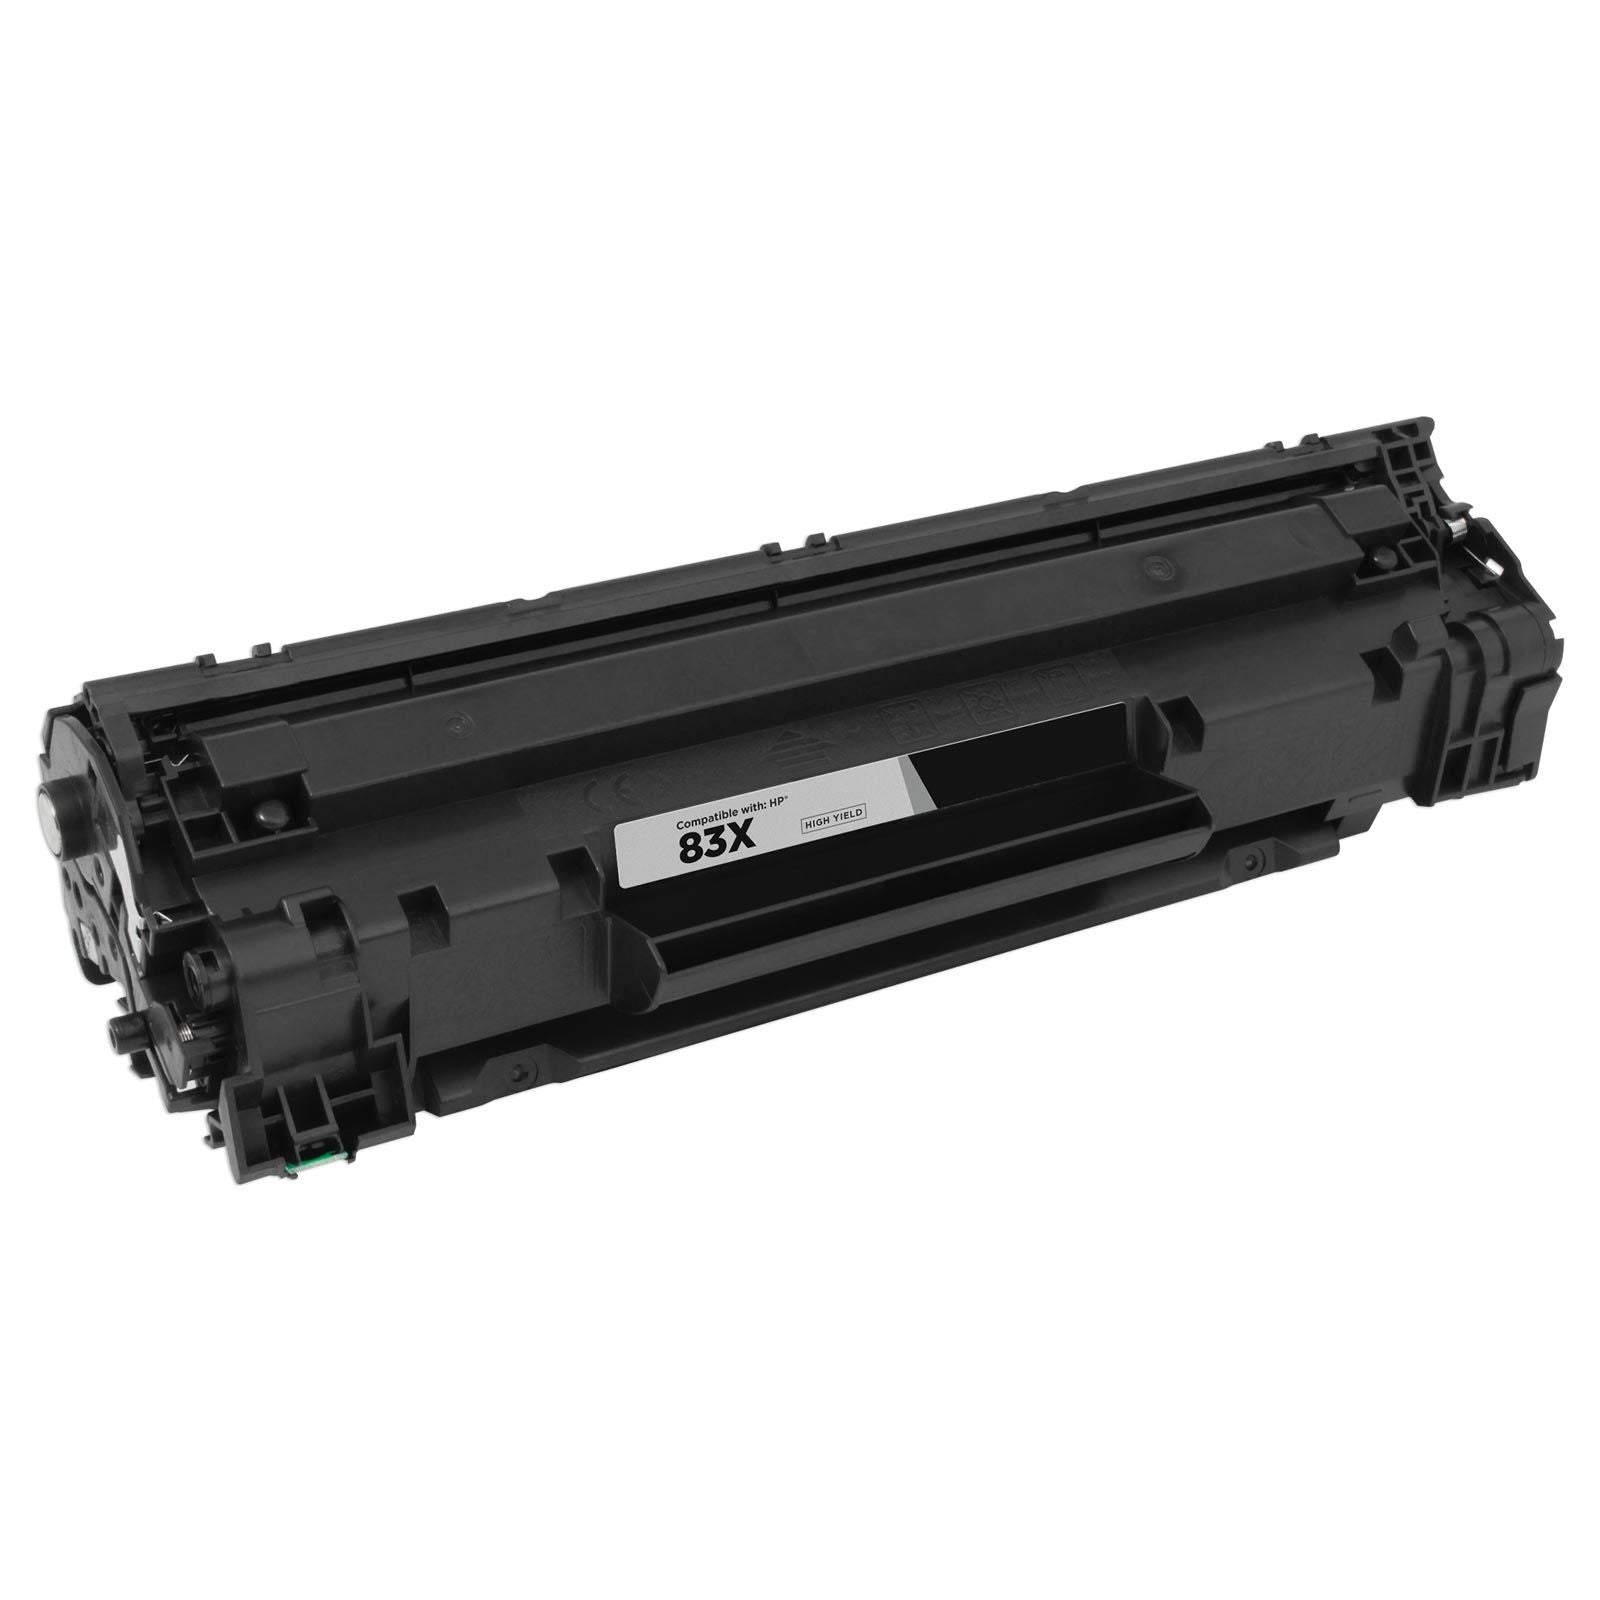 IMPERIAL BRAND Compatible toner cartridge for HP 83X HYLASER TONER 2,200 PAGES